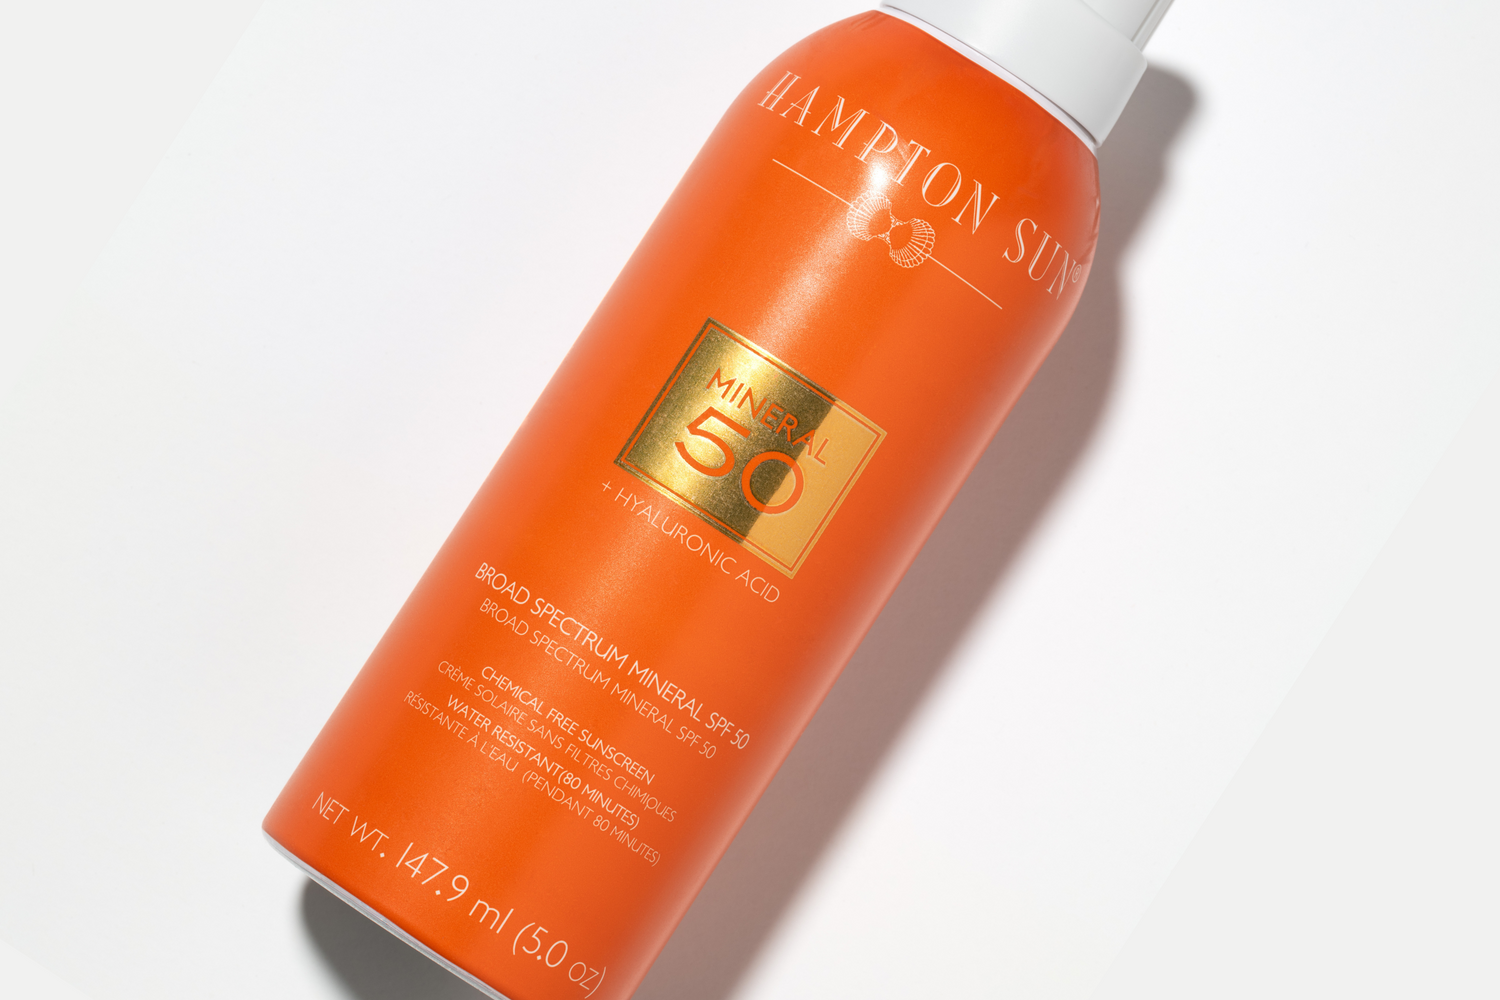 Introducing: SPF 50 Mineral Mist